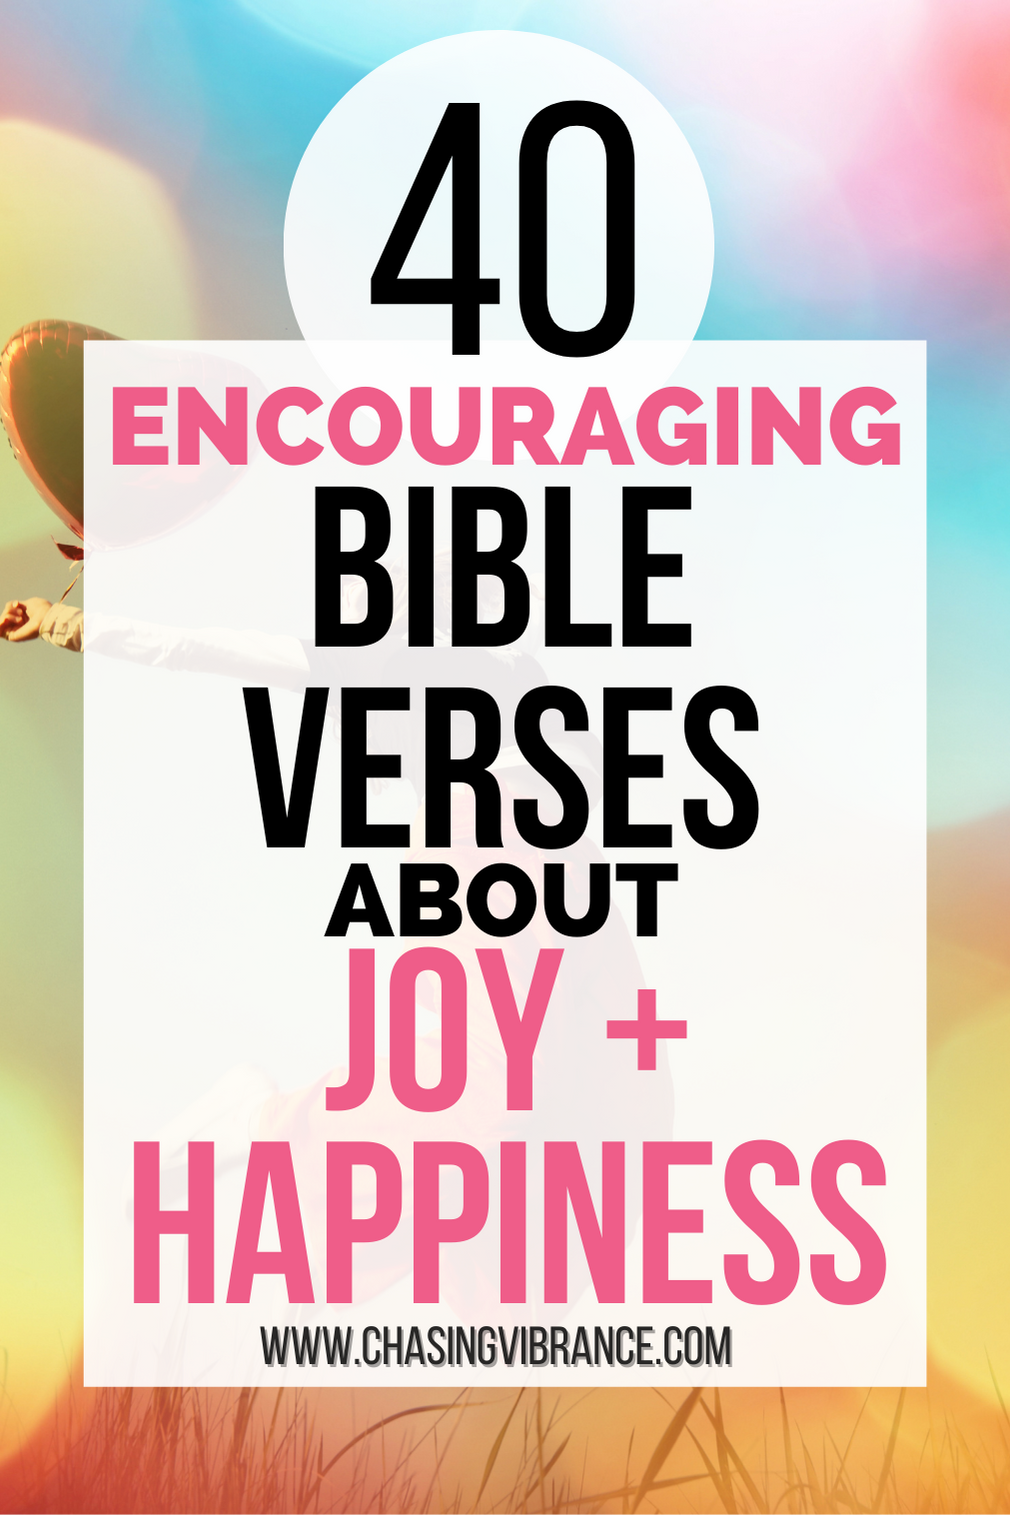 40 Encouraging Bible Verses About Joy and Happiness